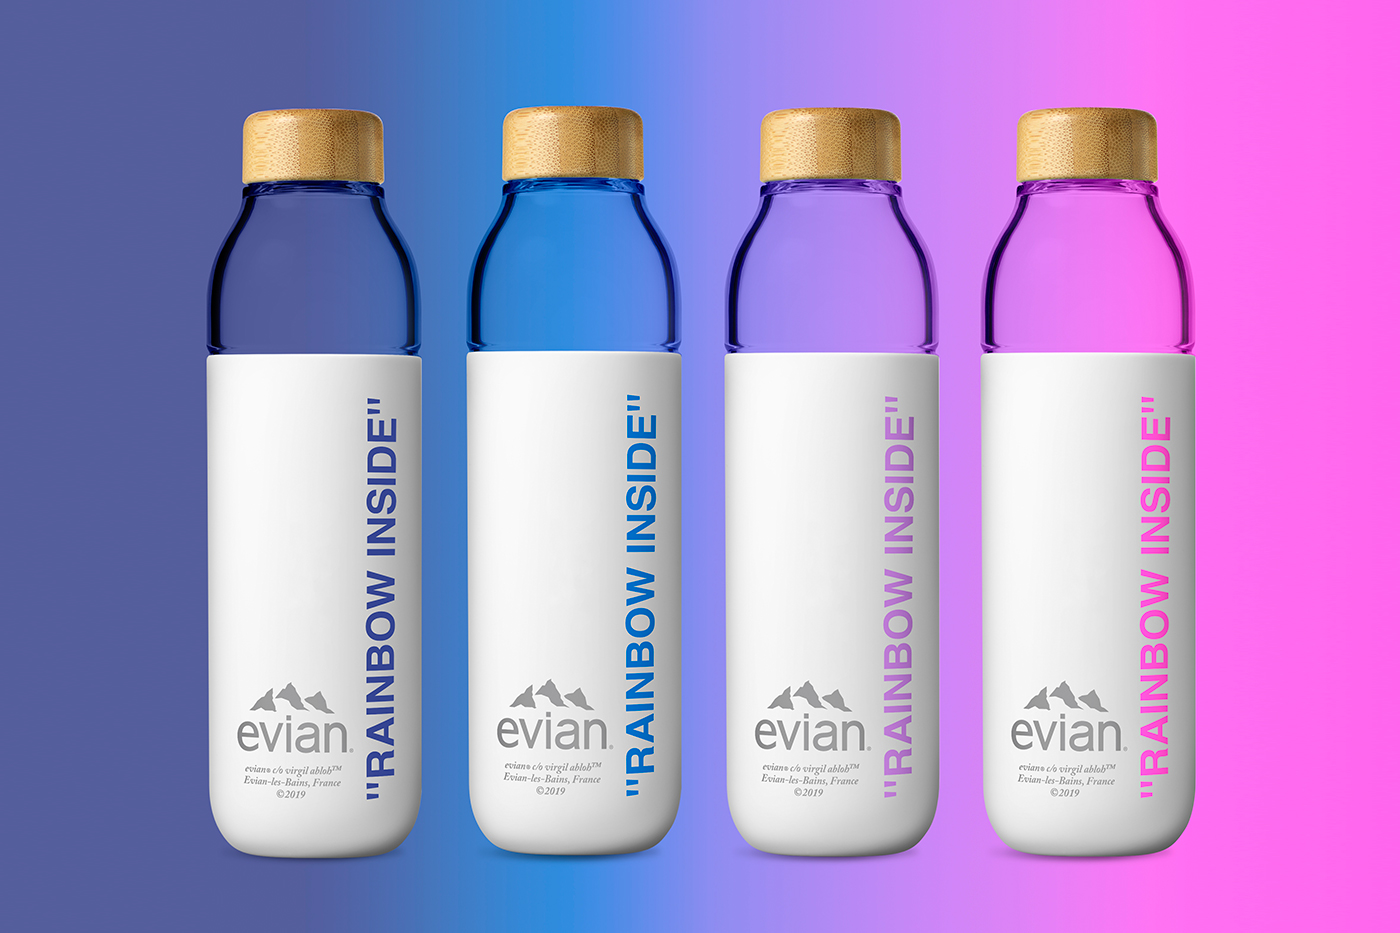 virgil abloh's limited edition glass bottle for evian drops in new york